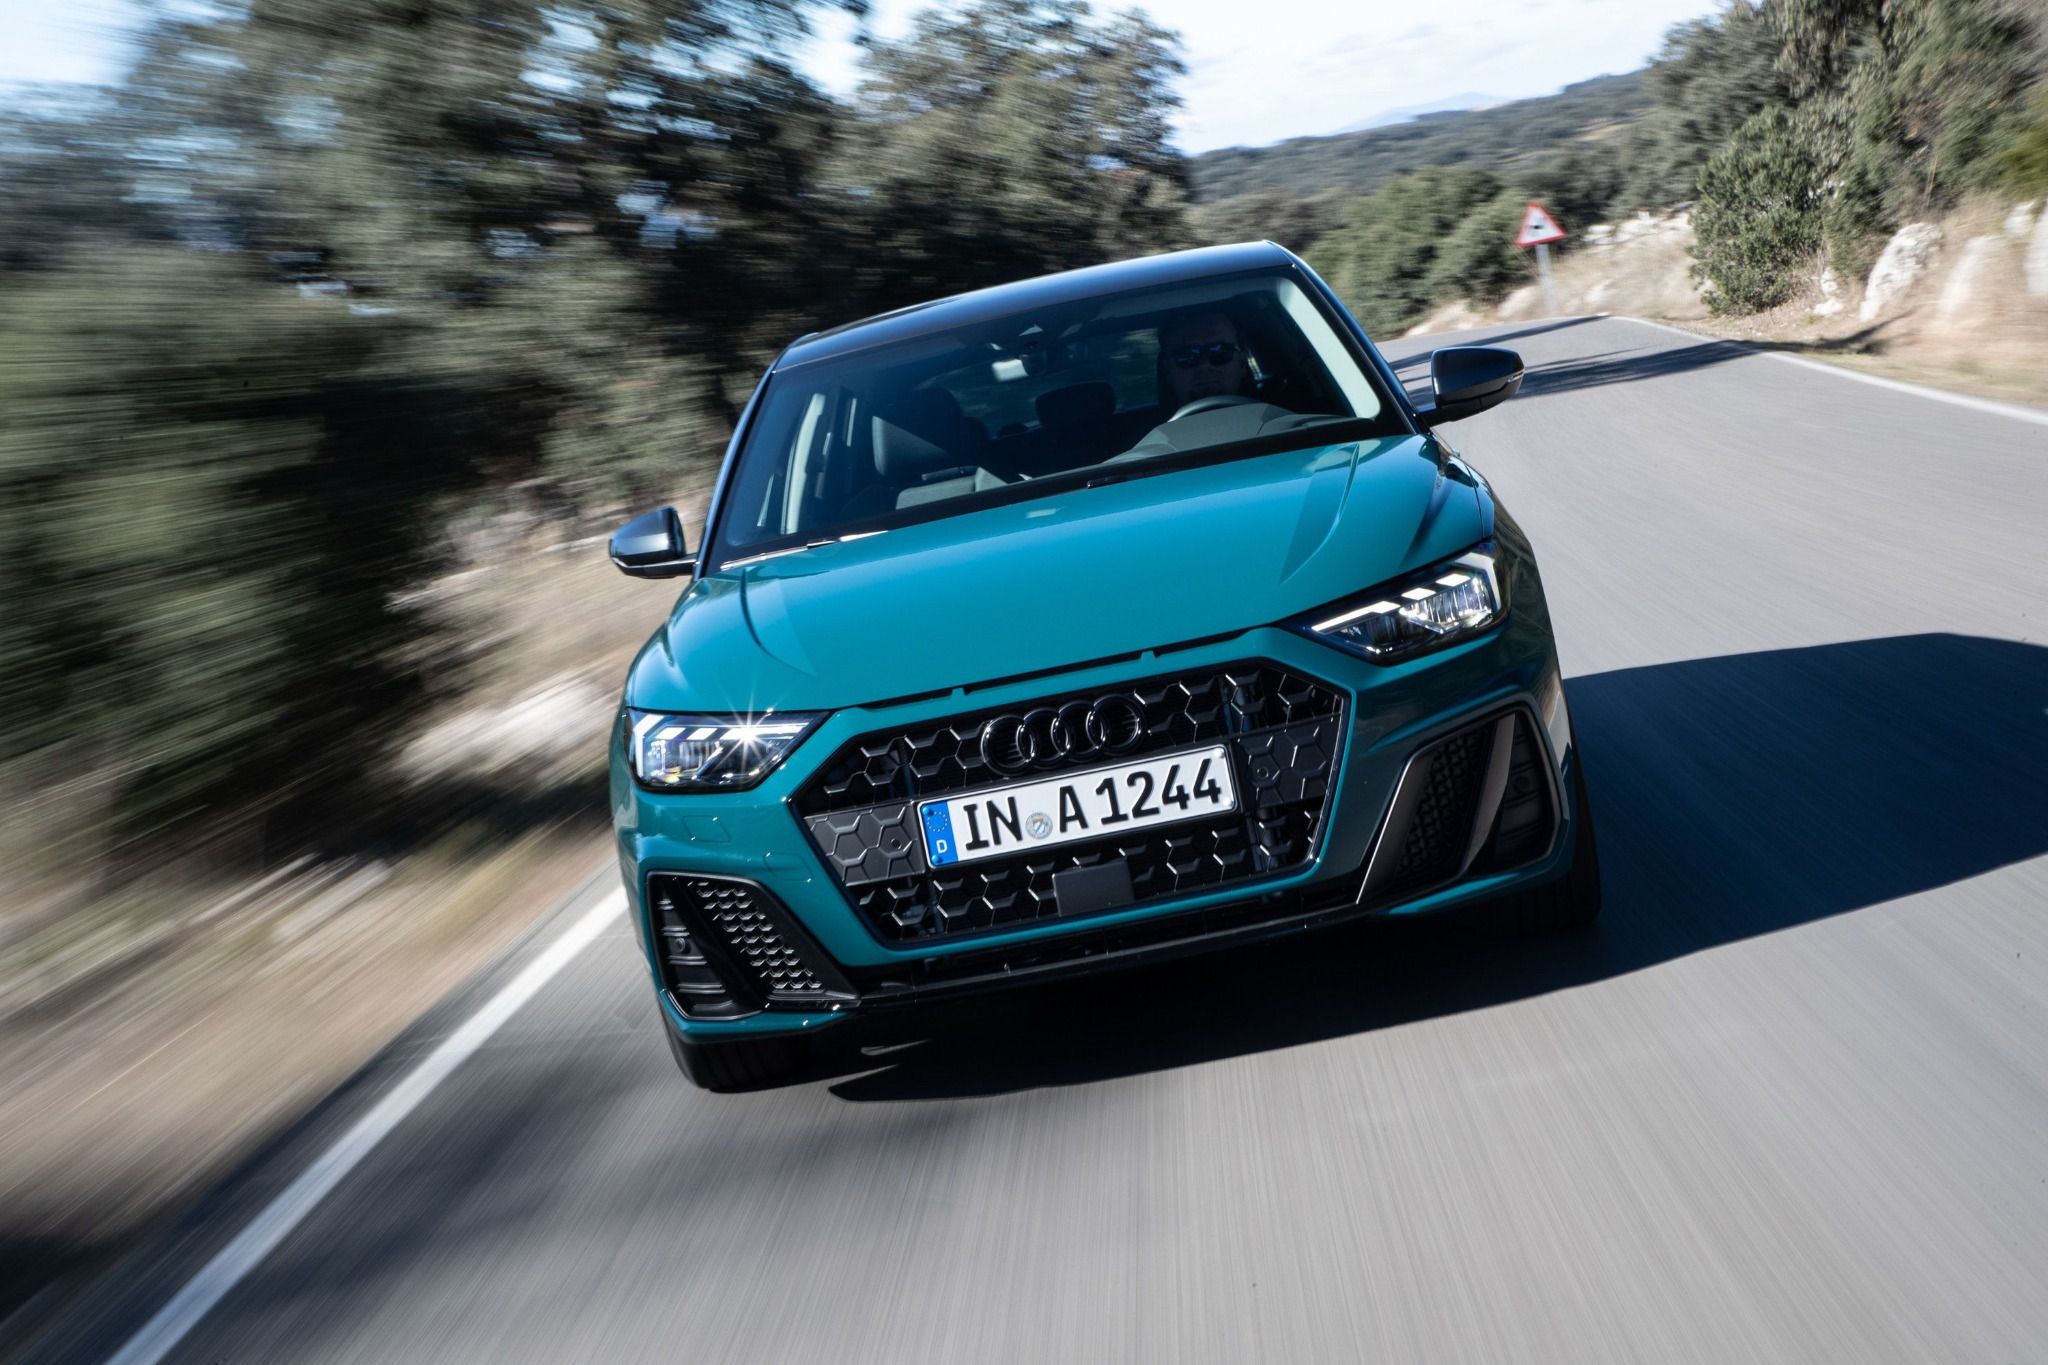 Front view of Audi A1 driving on a road